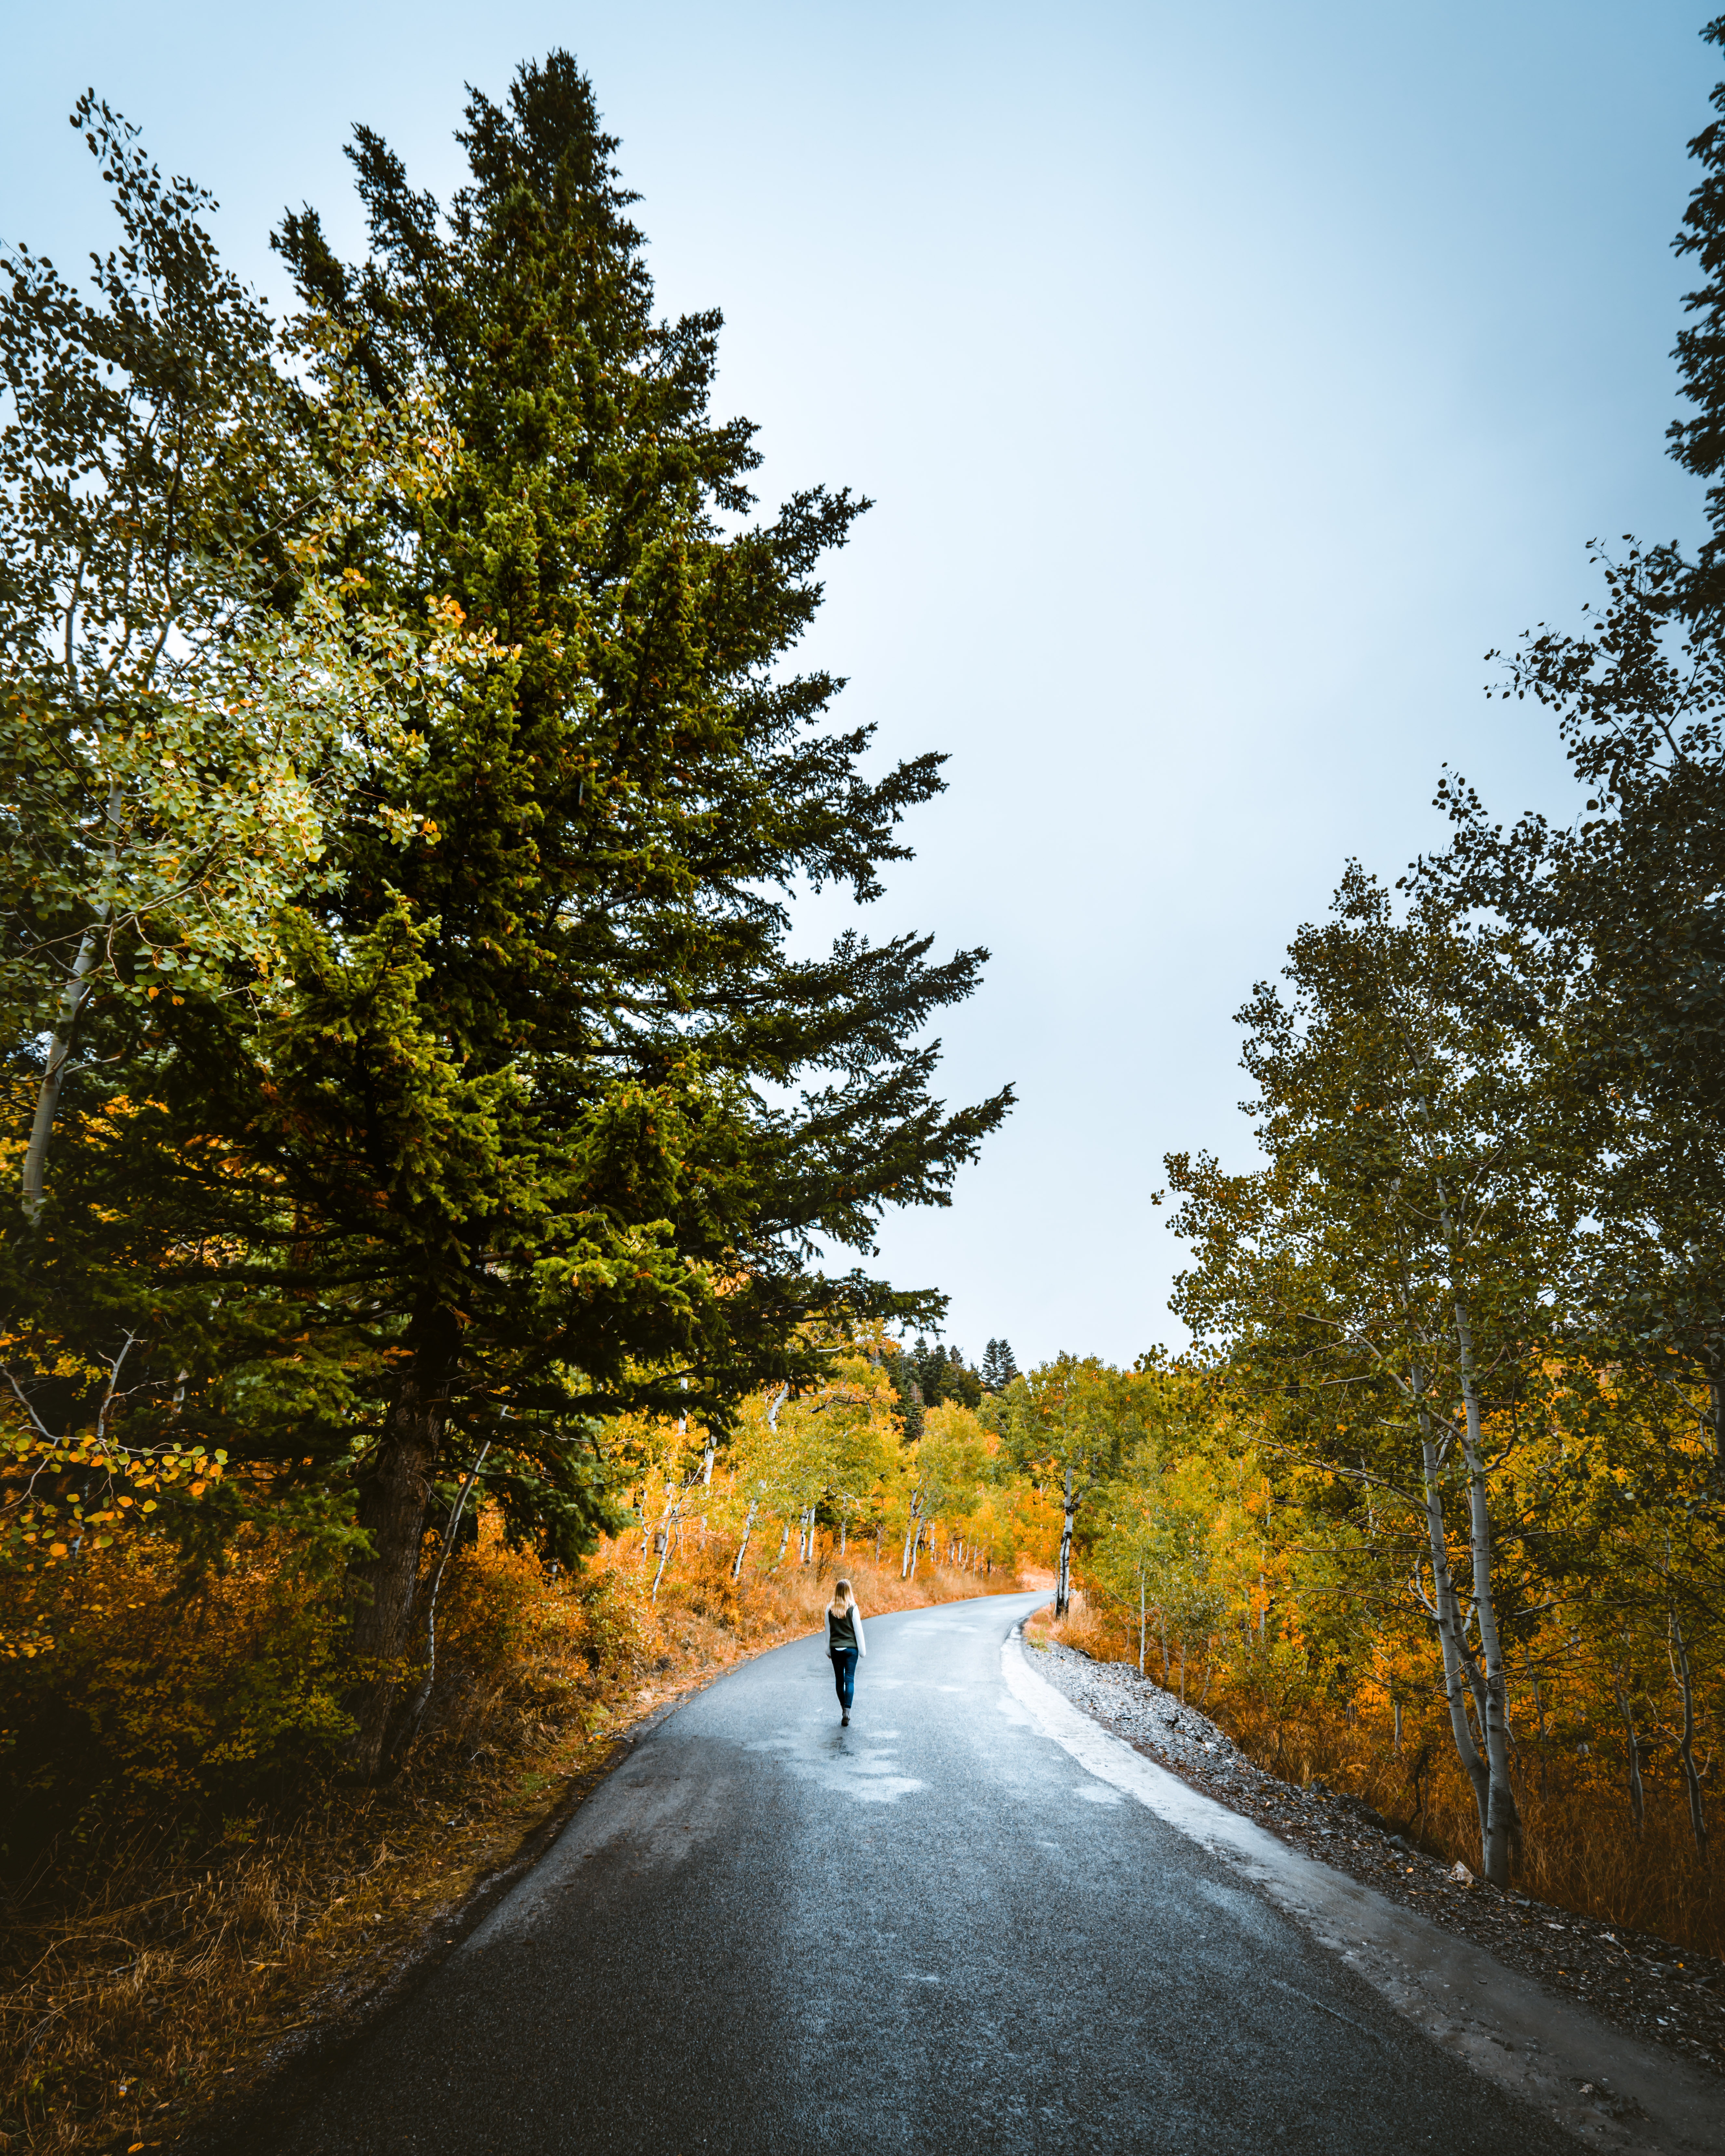 autumn, privacy, seclusion, miscellanea, miscellaneous, road, forest, stroll, loneliness